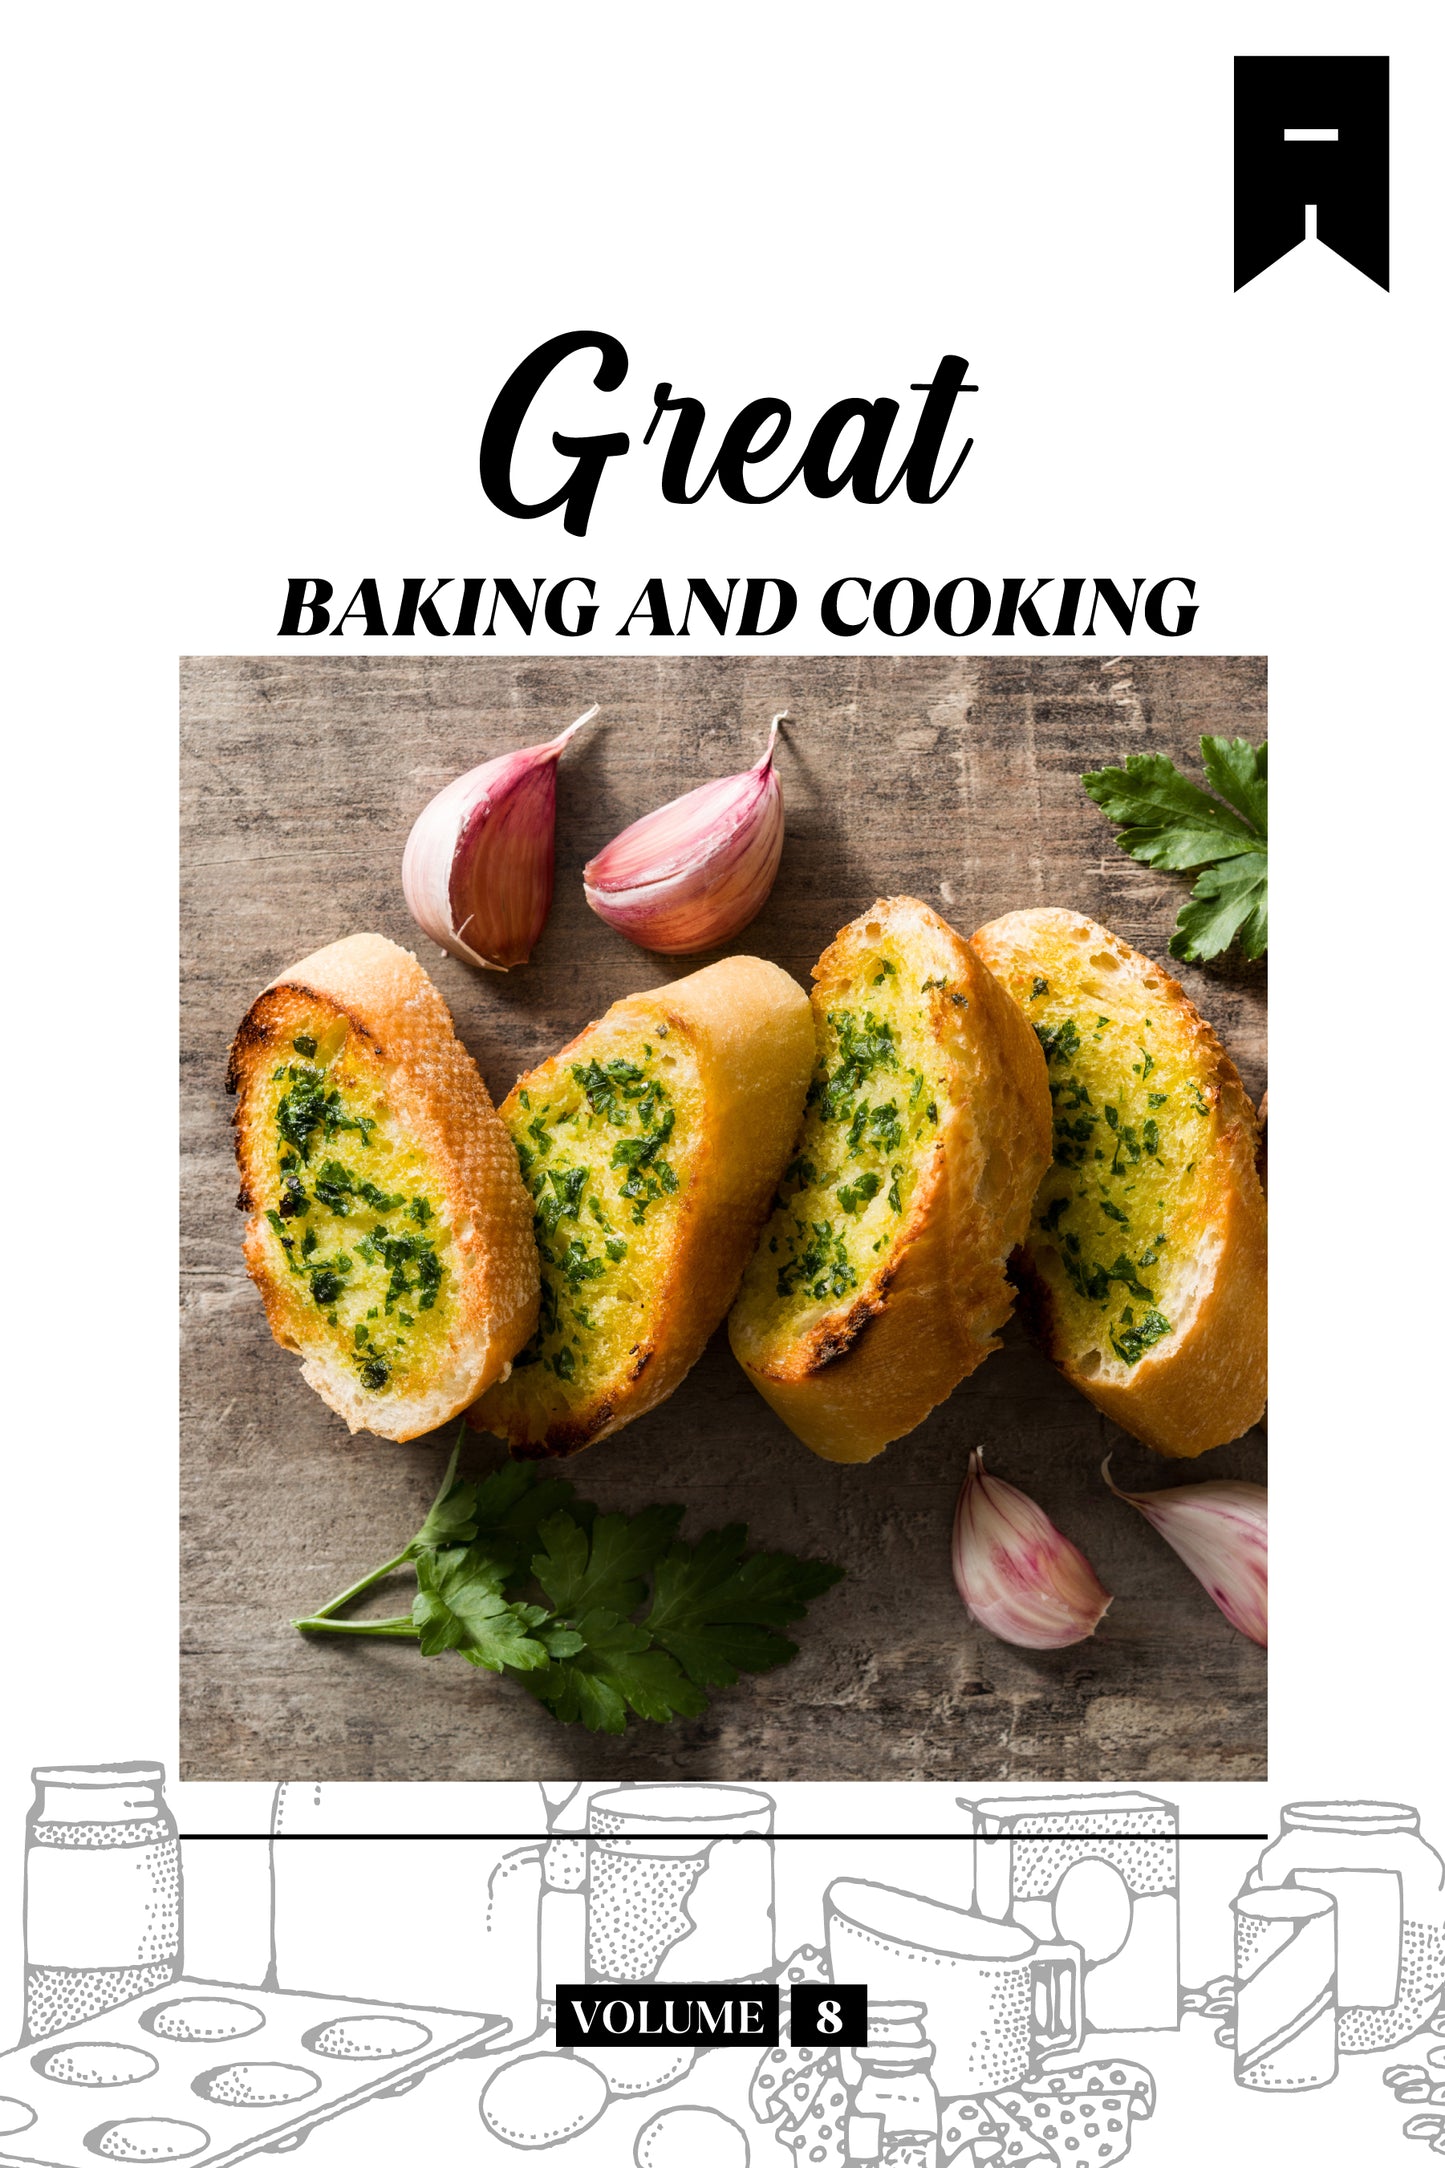 Great Baking (Volume 8) - Physical Book